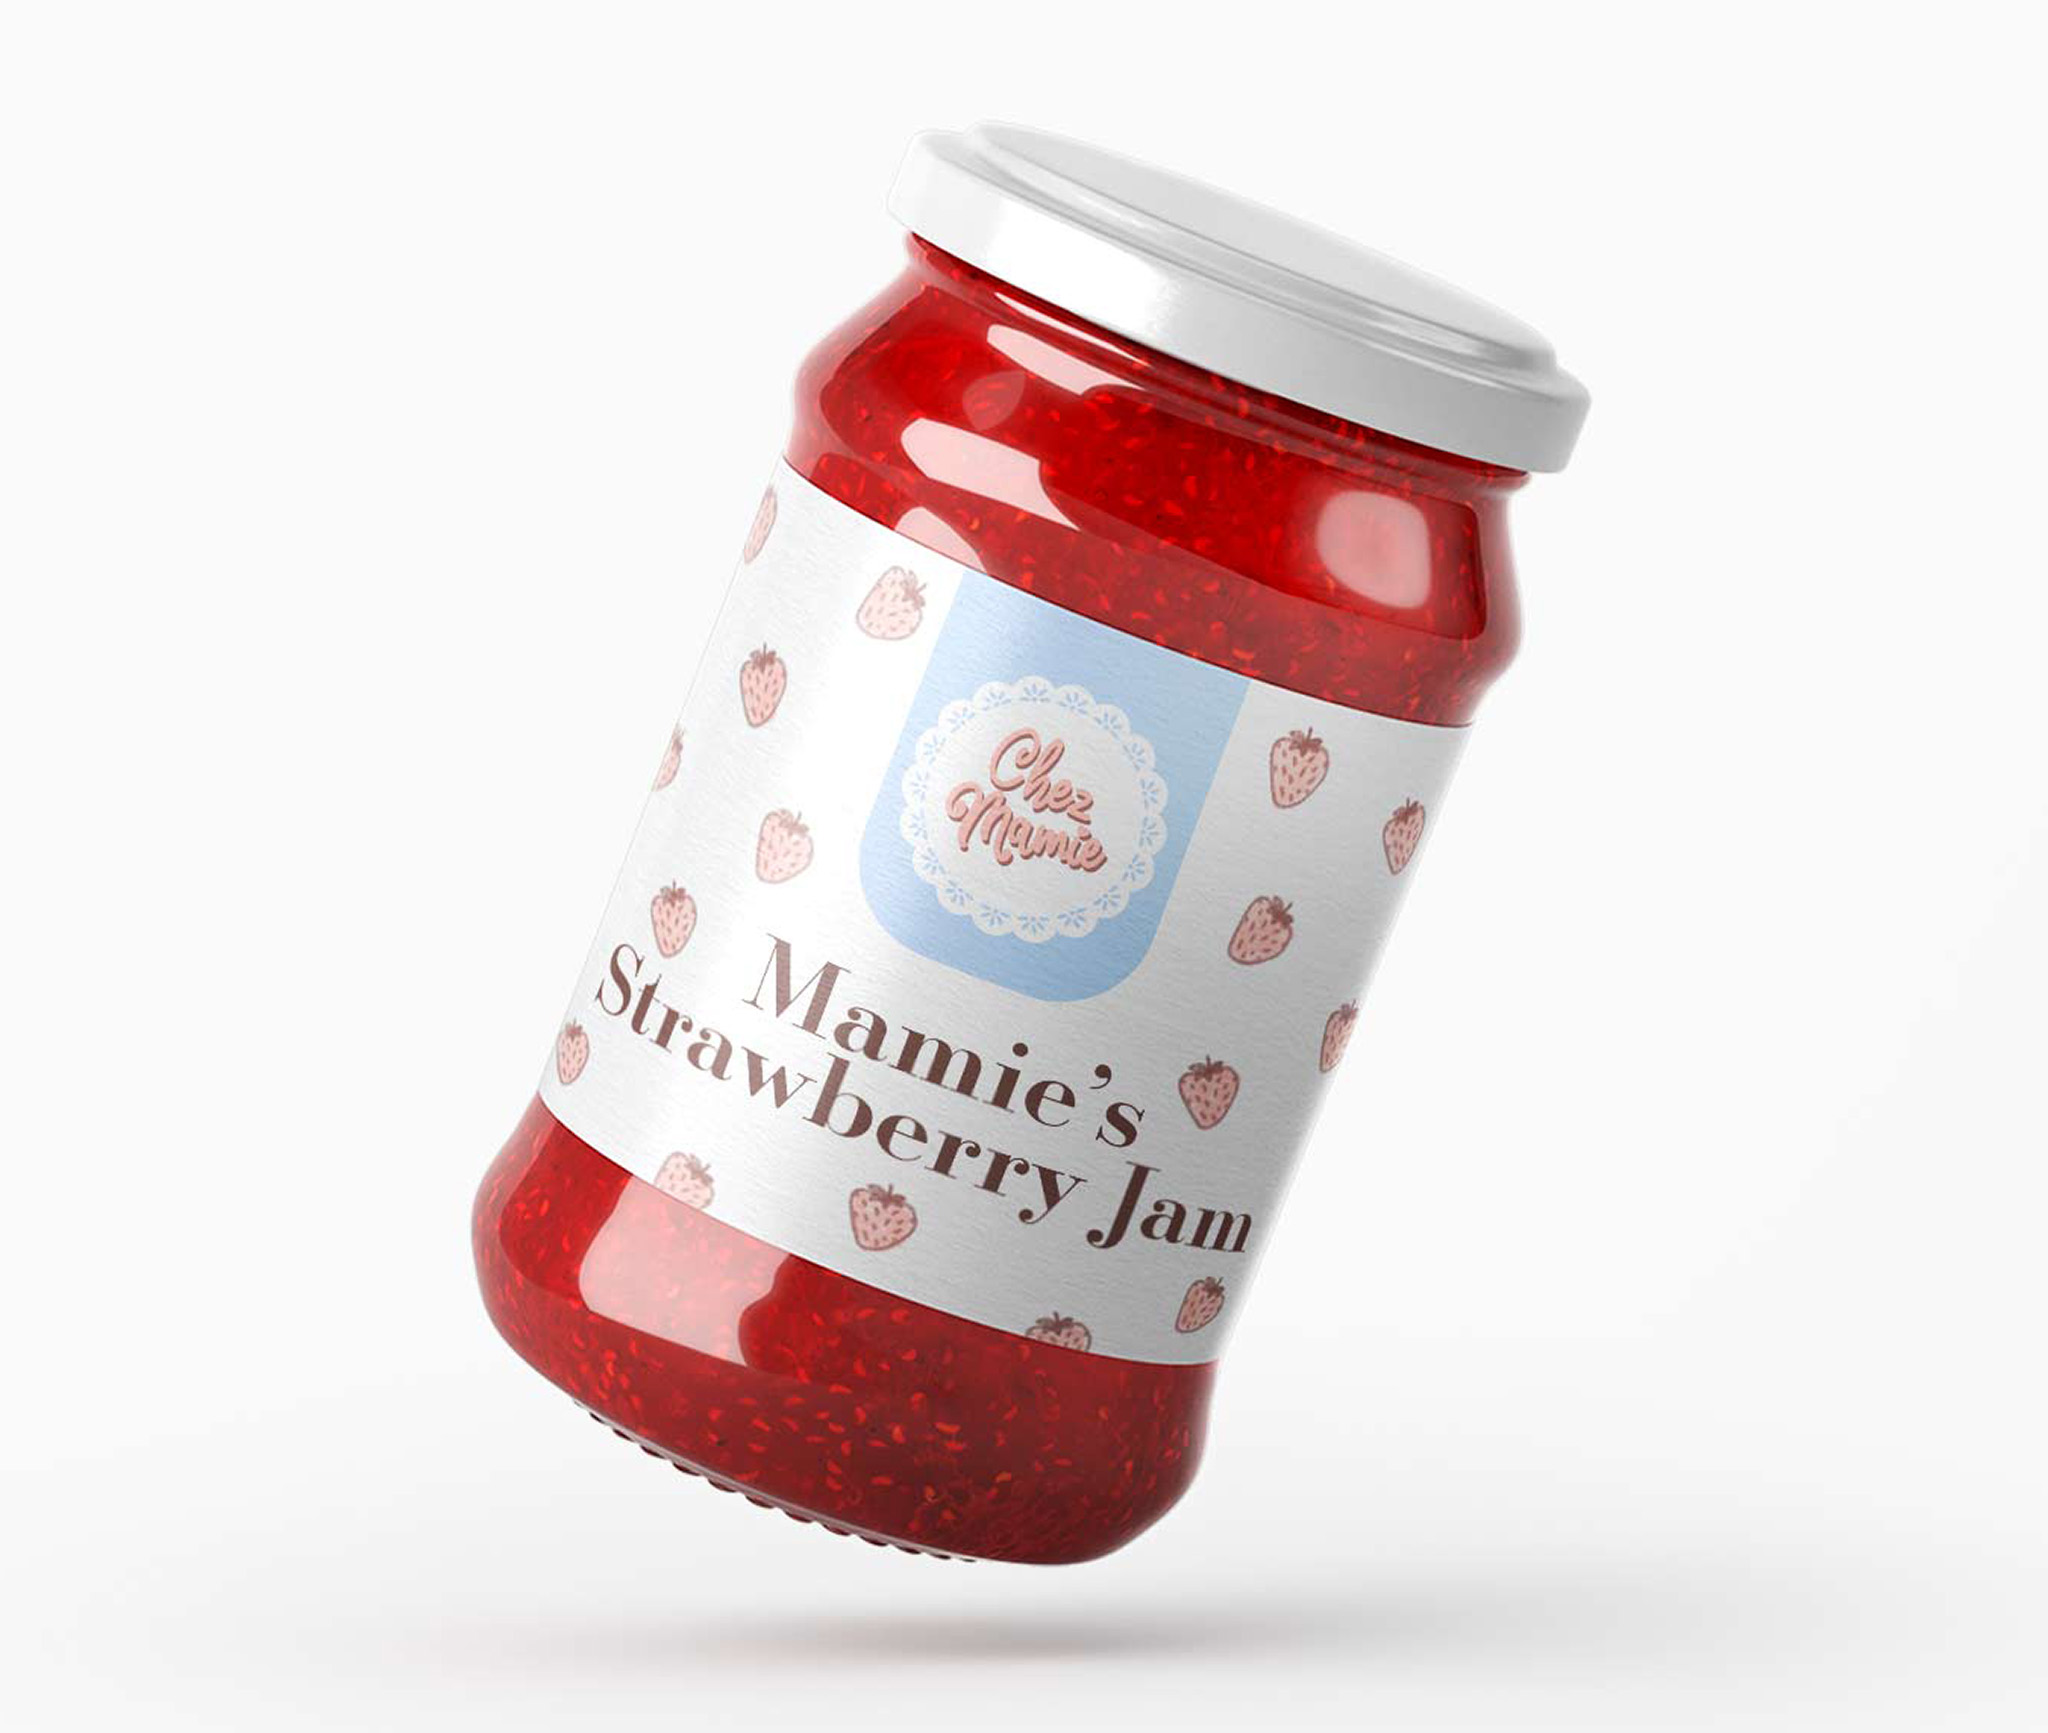 Mockup of packaging design for jam jar for fictional company Chez Mamie. The design features white label with a hand drawn strawberry pattern, the company logo and text reading "Mamie's strawberry jam".